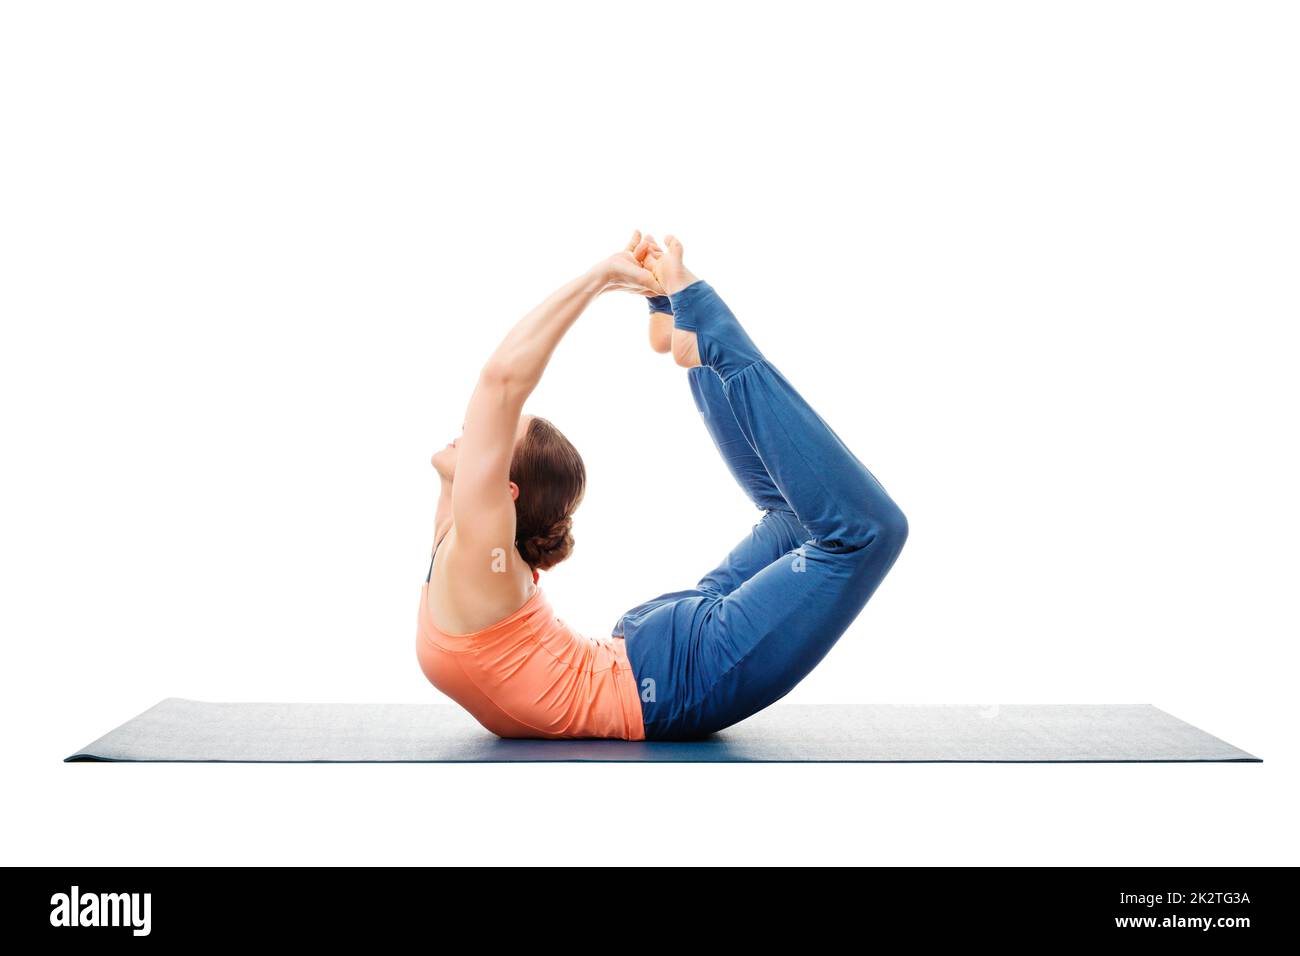 Yoga backbend Cut Out Stock Images & Pictures - Alamy